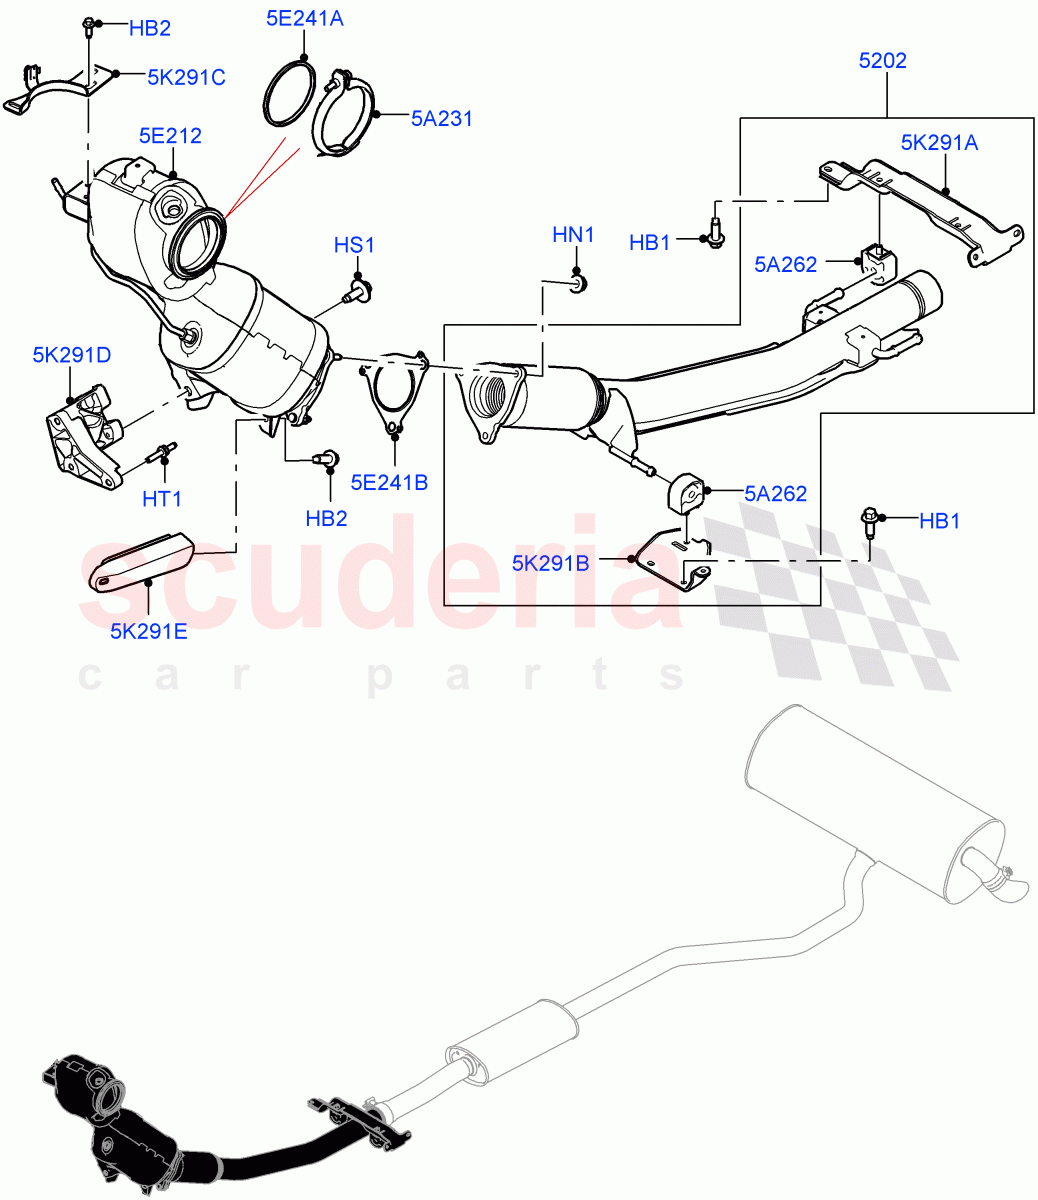 Front Exhaust System(1.5L AJ20P3 Petrol High,8 Speed Automatic Trans 8G30,Changsu (China)) of Land Rover Land Rover Discovery Sport (2015+) [1.5 I3 Turbo Petrol AJ20P3]